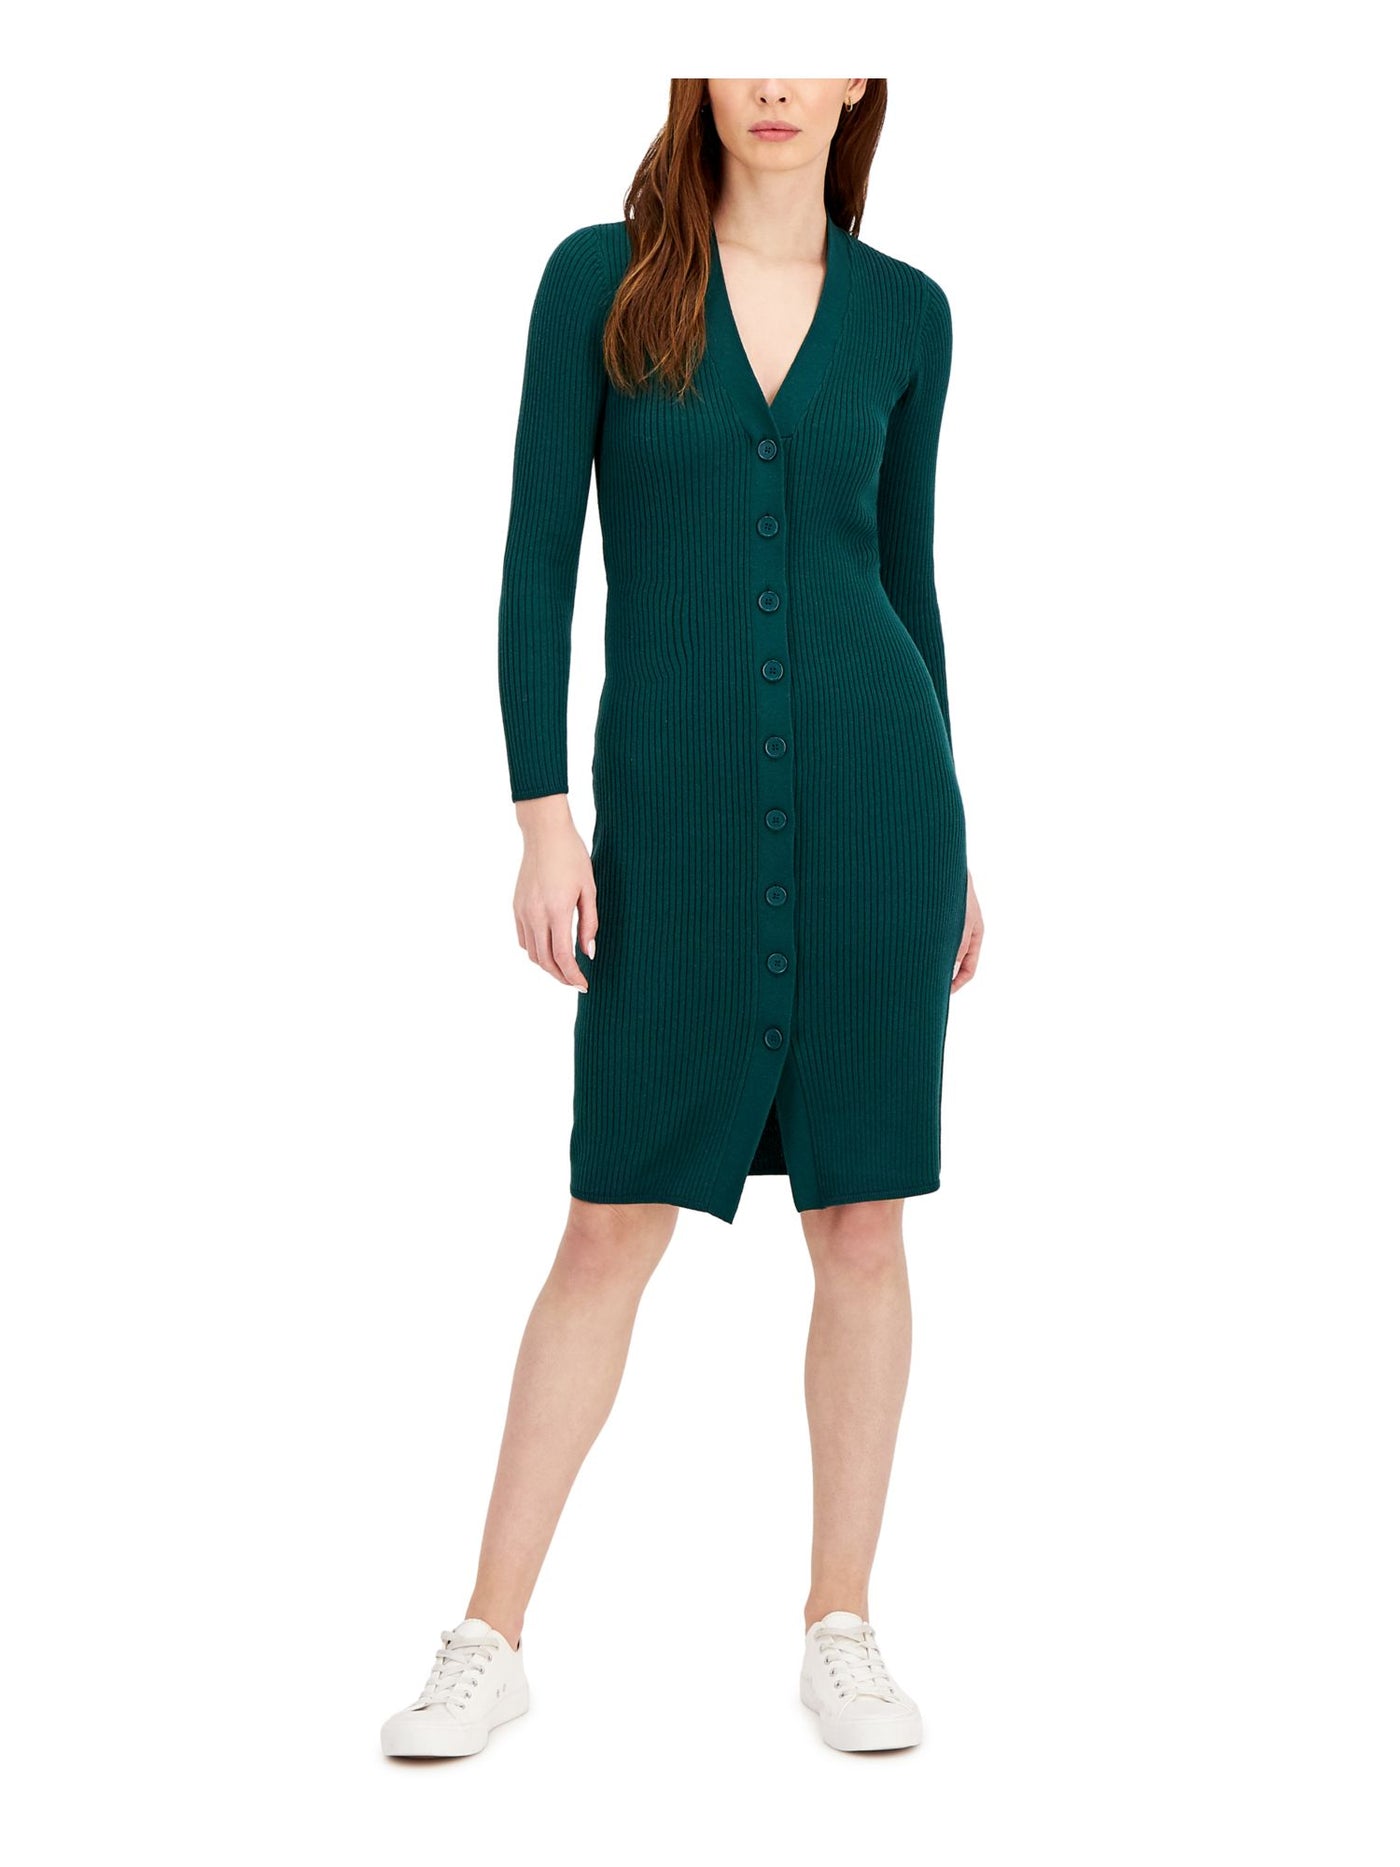 BAR III DRESSES Womens Green Knit Ribbed Fitted Button Detail Long Sleeve V Neck Above The Knee Wear To Work Sweater Dress S